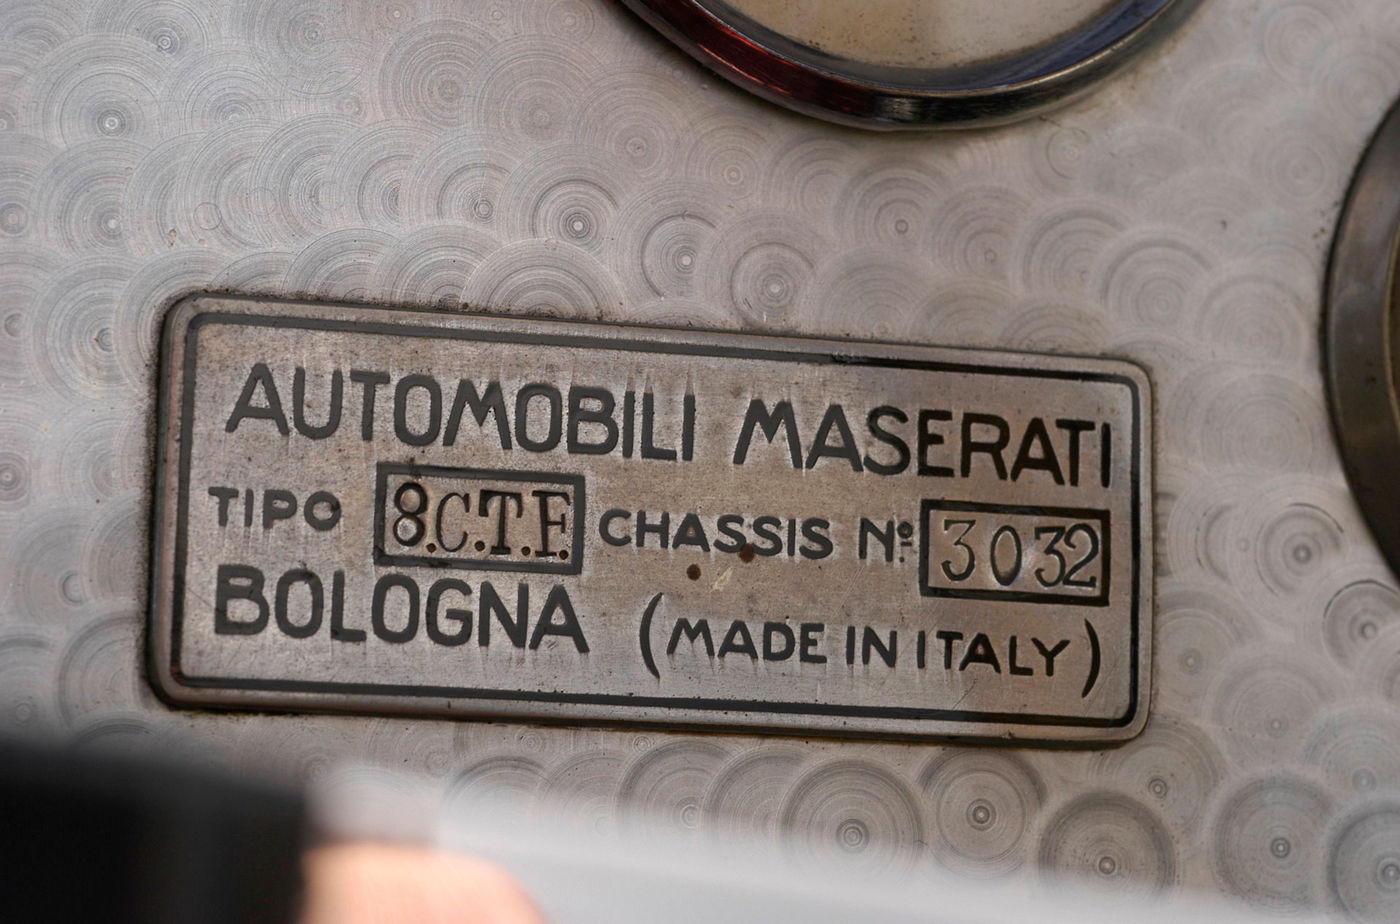 Lettering "AUTOMOBILI Maserati TIPO 8CTF CHASSIS N.3032 BOLOGNA (MADE IN ITALY)"